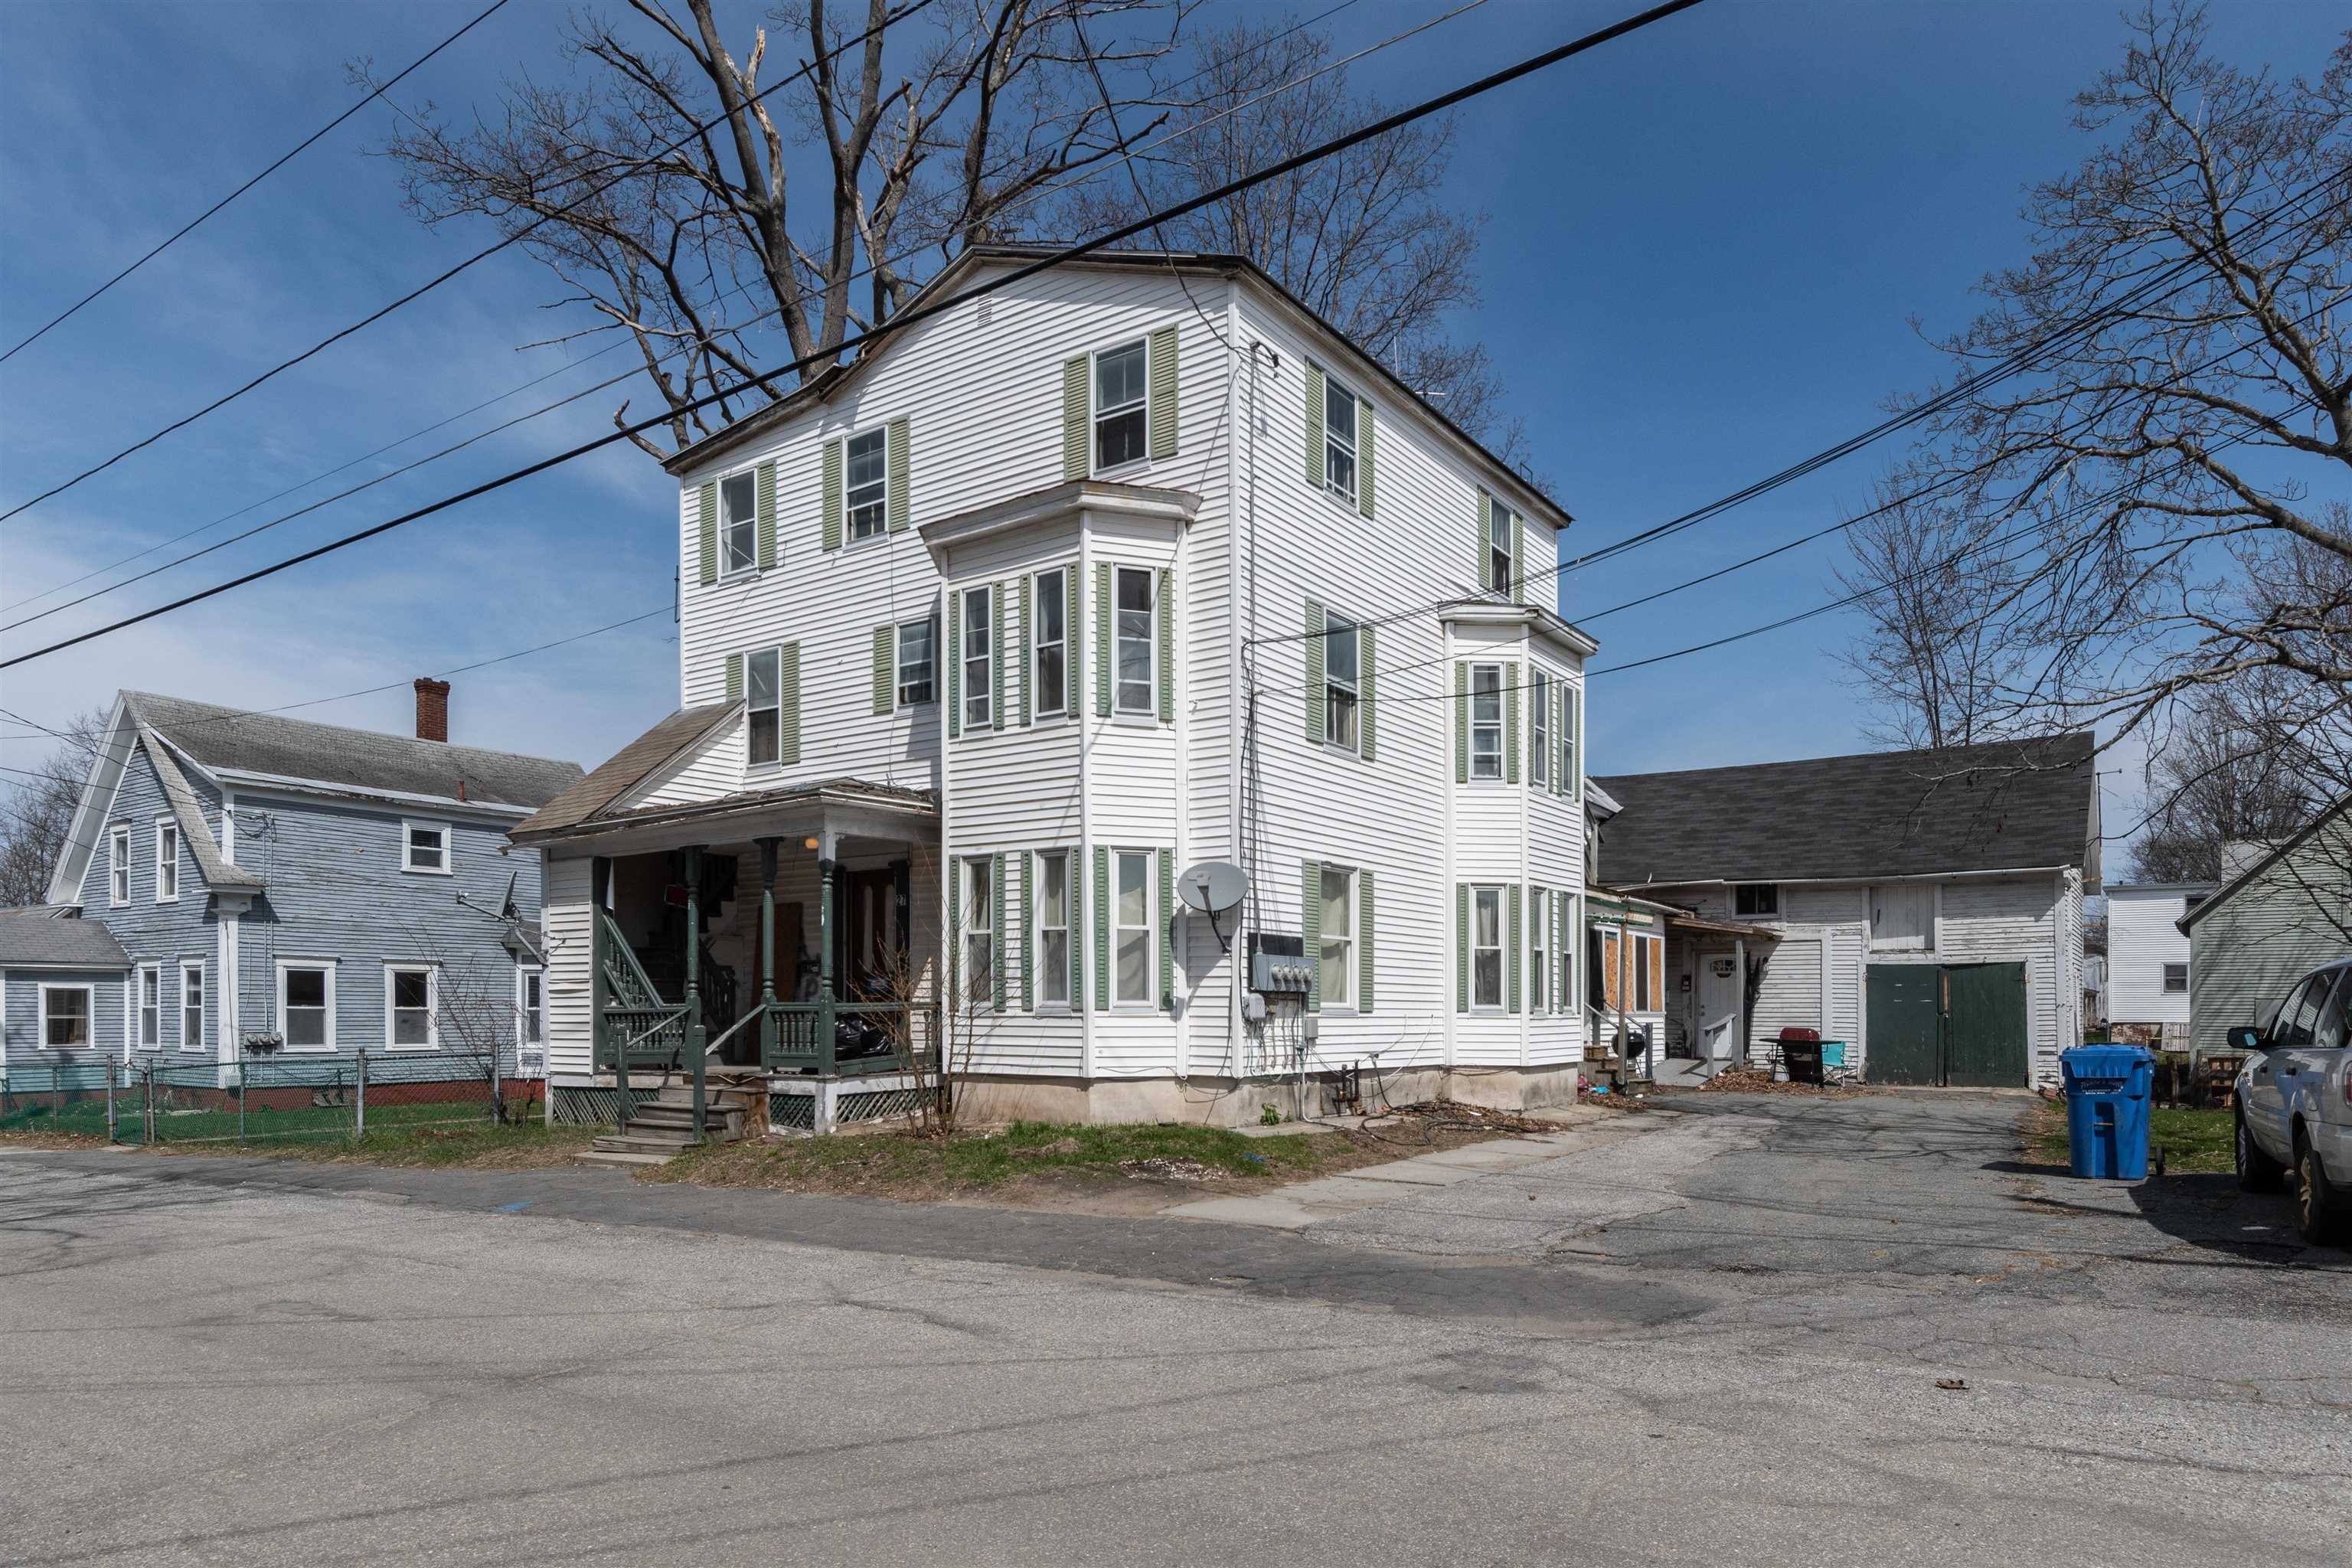 image of Claremont NH  4 Unit Multi Family | sq.ft. 5288 